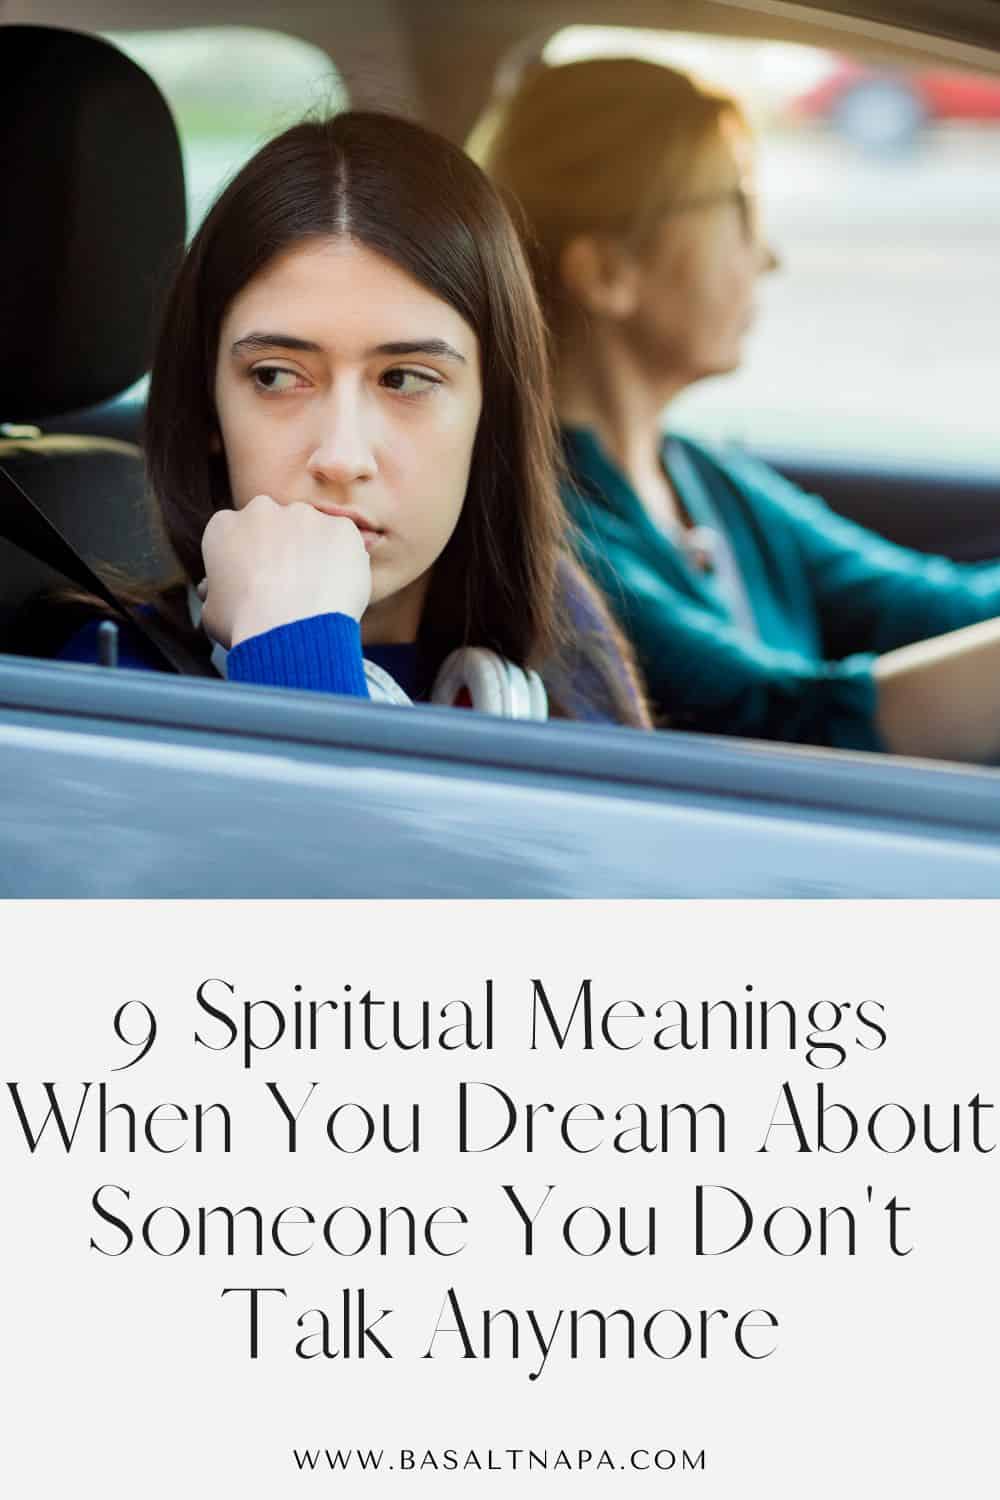 9 Spiritual Meanings When You Dream About Someone You Don't Talk Anymore